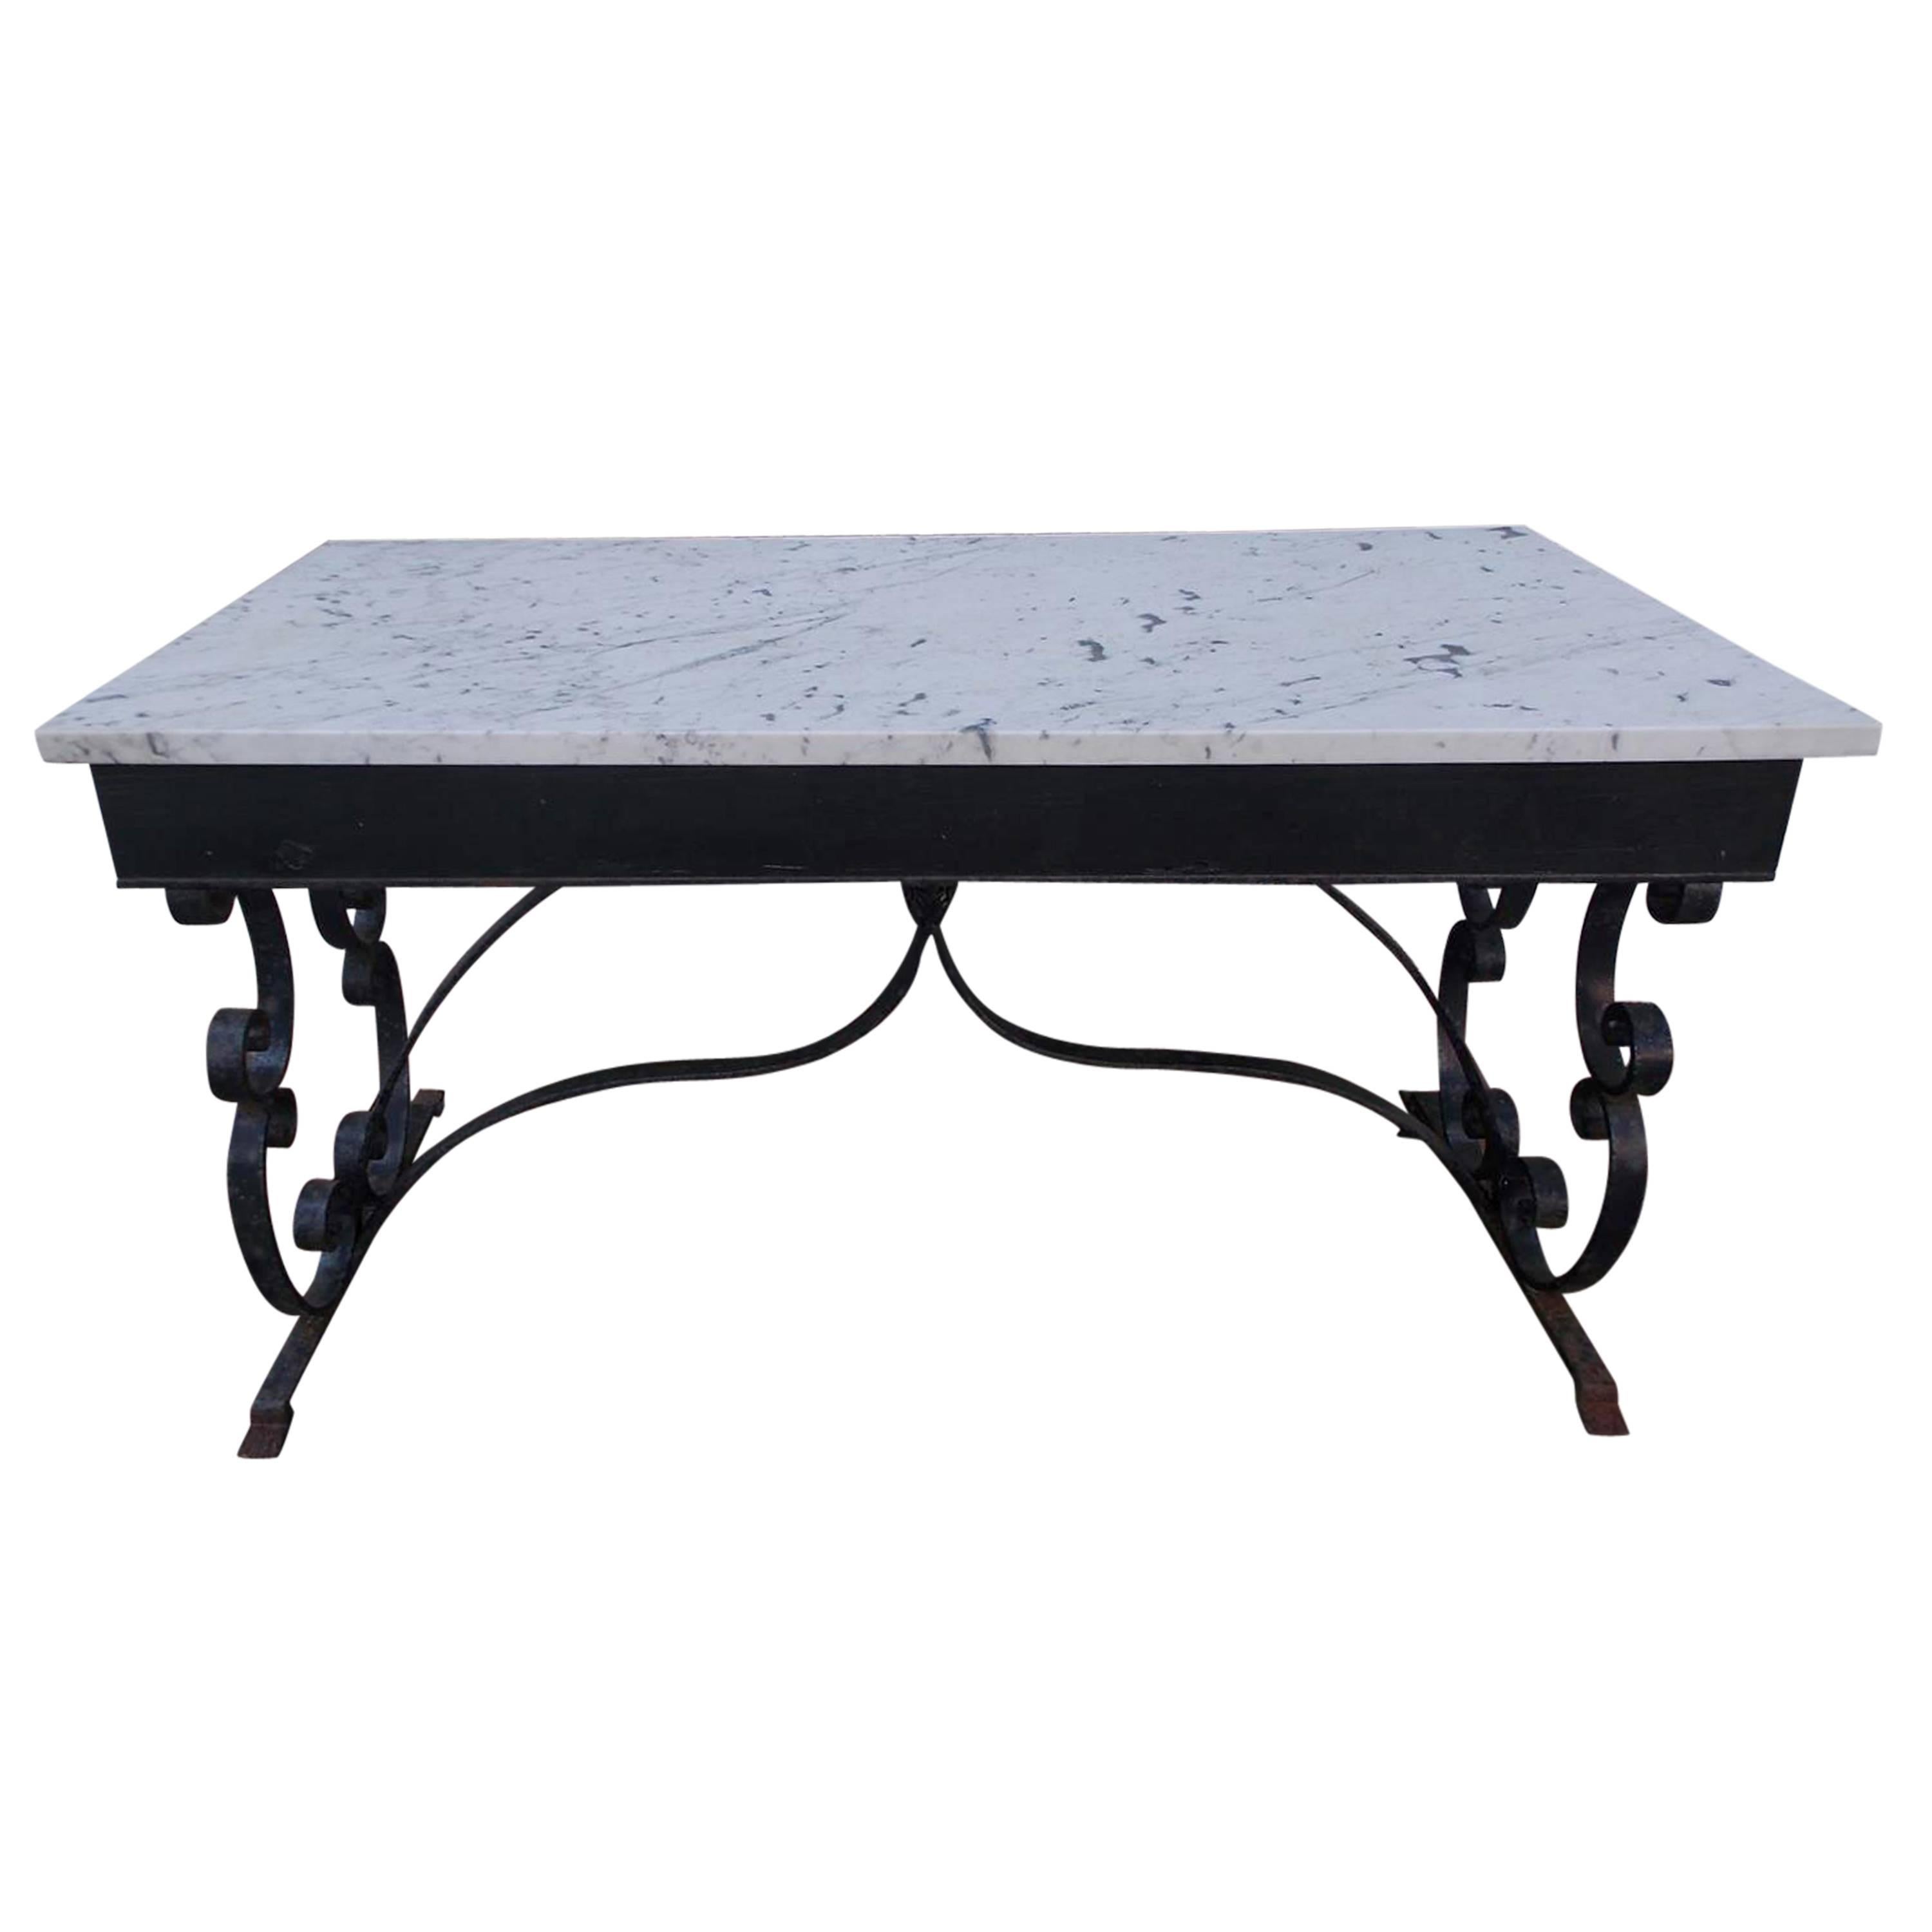 American Wrought Iron and Marble-Top Console, Circa 1840